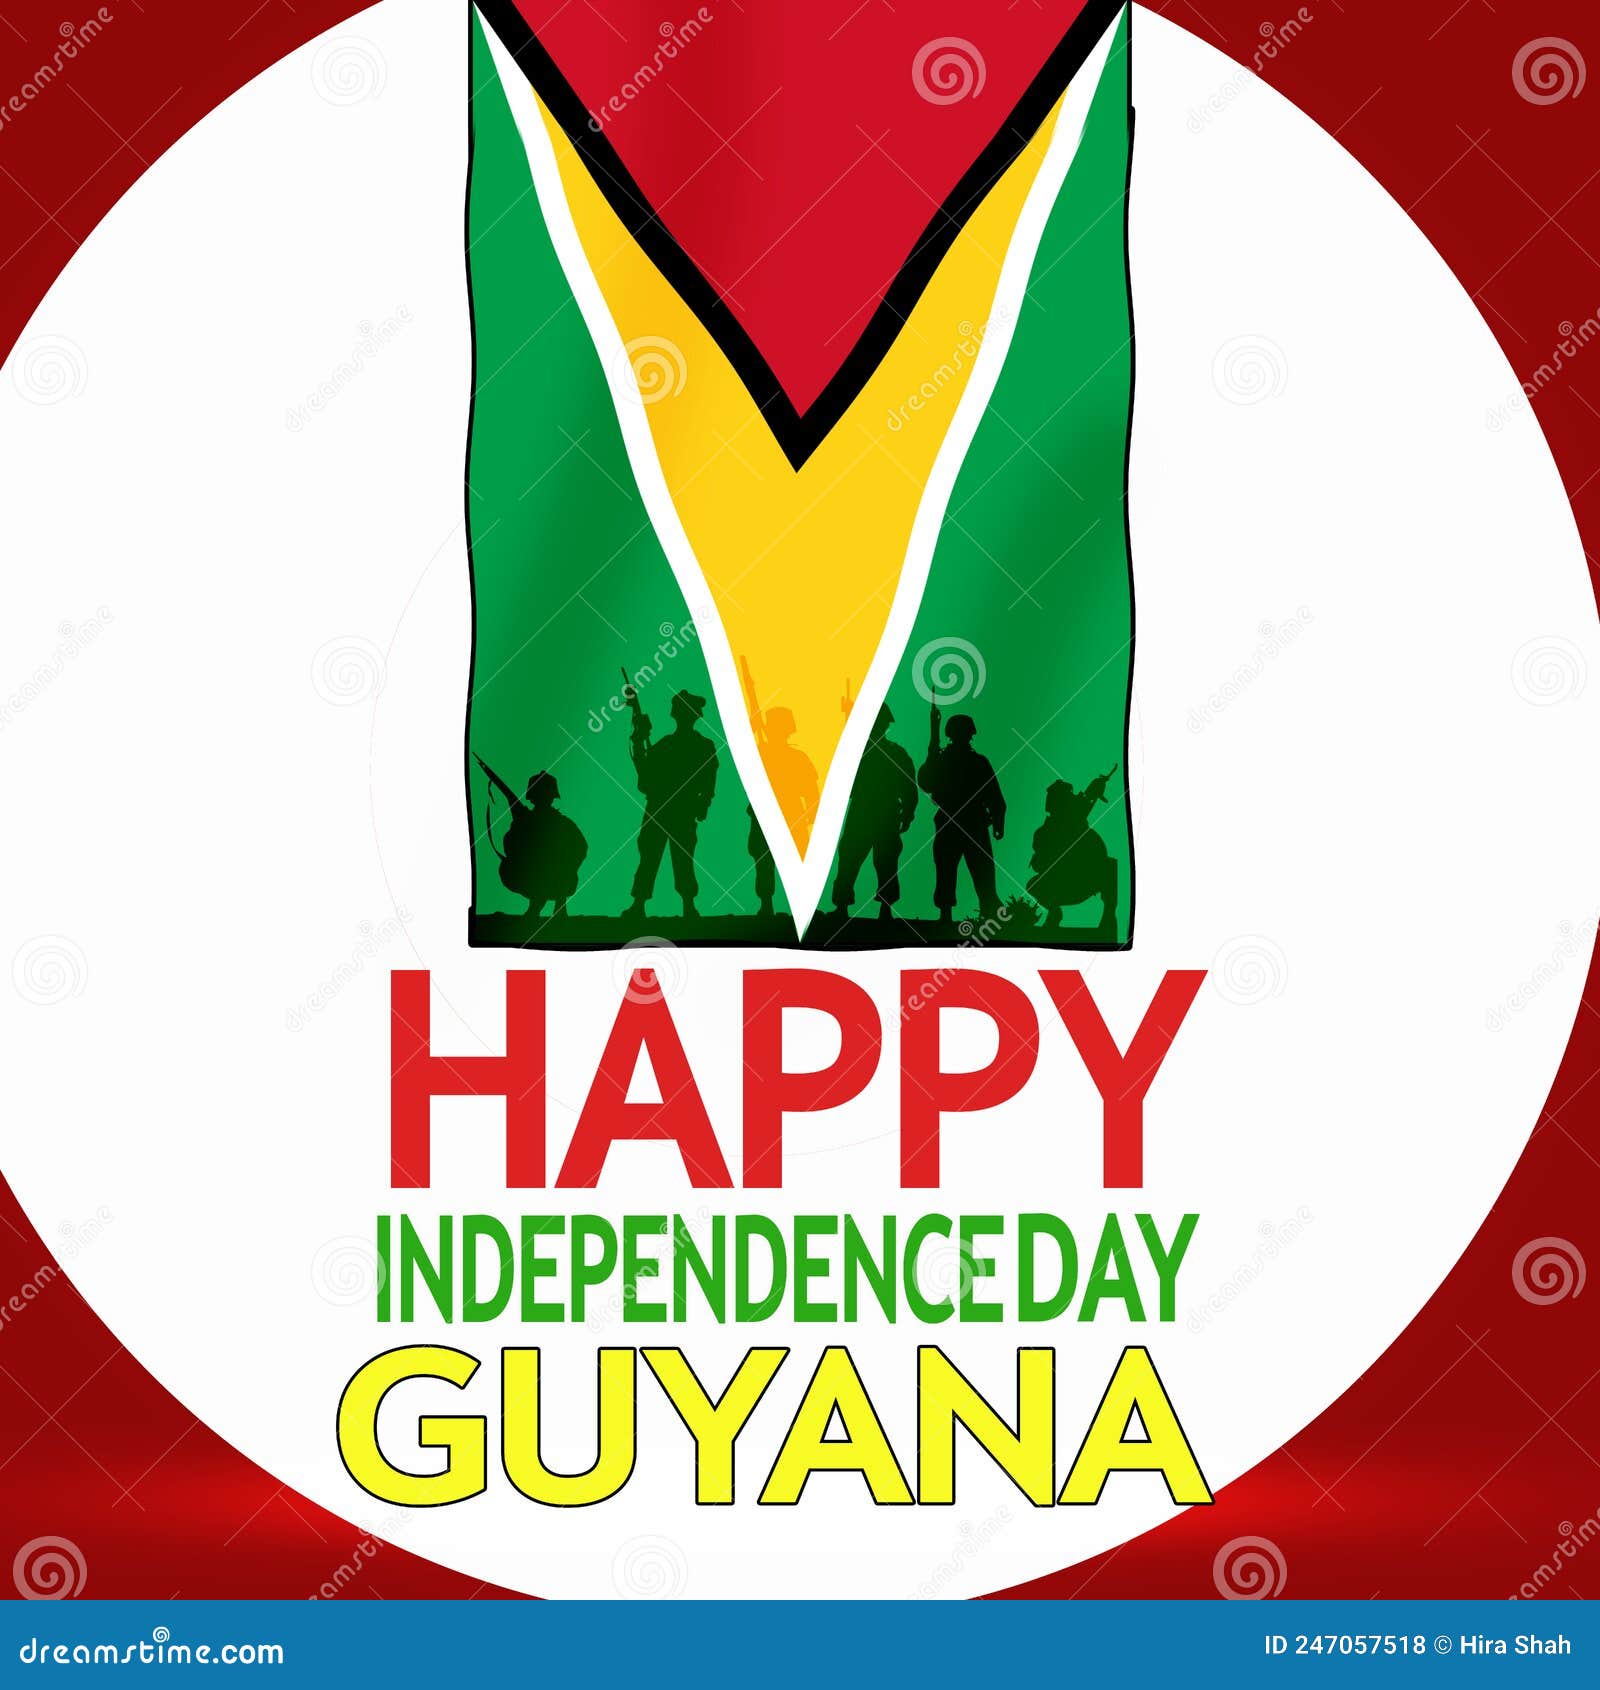 Happy Independence Day Guyana Wallpaper with Waving Flag. Abstract